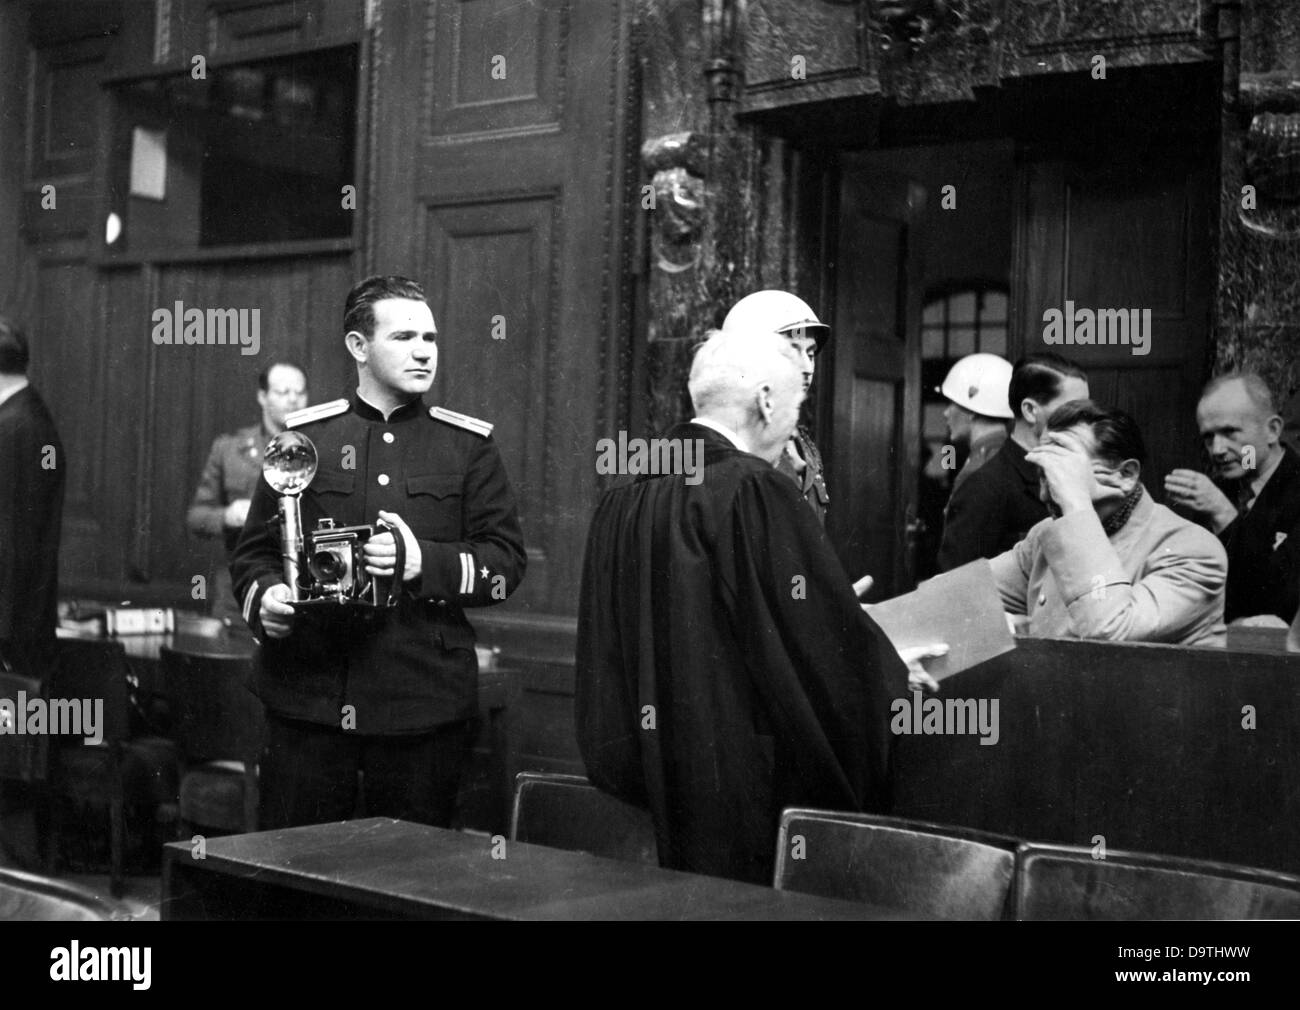 The picture of a colleague shows Soviet photographer Yevgeny Khaldei in uniform in the court room of the Nuremberg Trials against German war criminals. Main defendant Hermann Göring  covers his face with his hand. Stock Photo